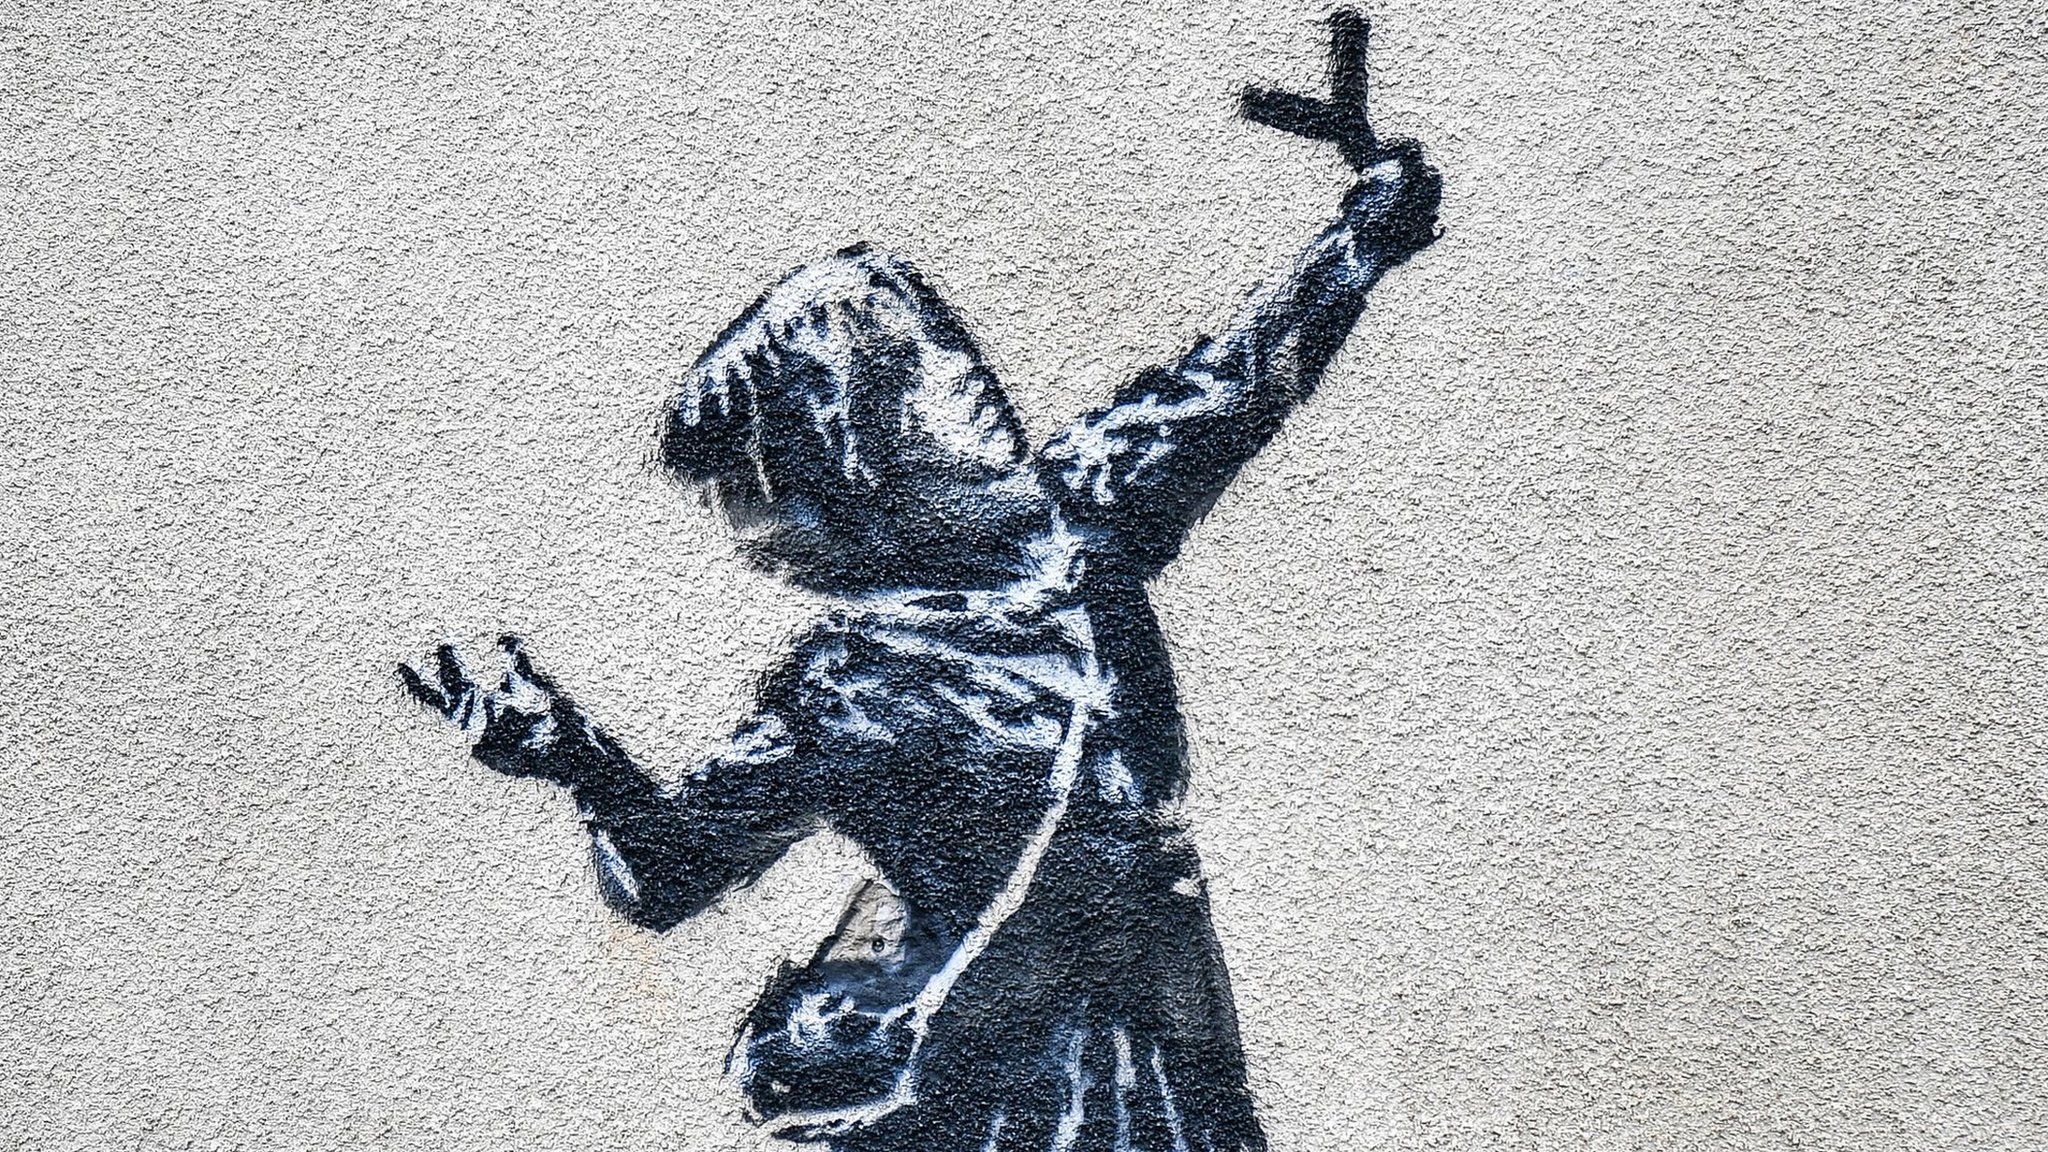 Is renowned artist Banksy responsible for street art that suddenly